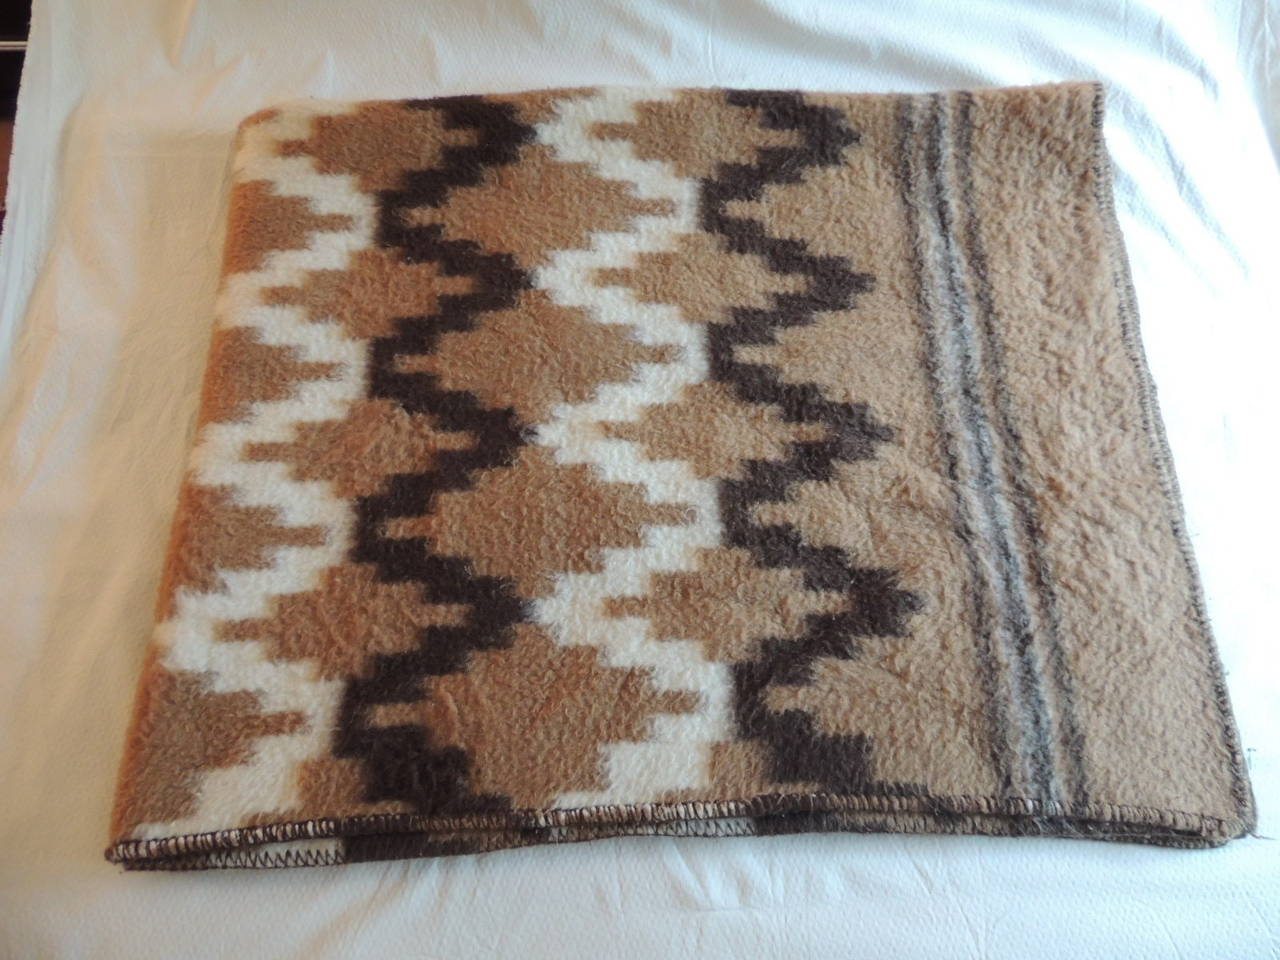 Large vintage modern design Alpaca blanket. Reversible design in shades of white, brown and camel. Great blanket or throw. Hand-stitched all around edges.